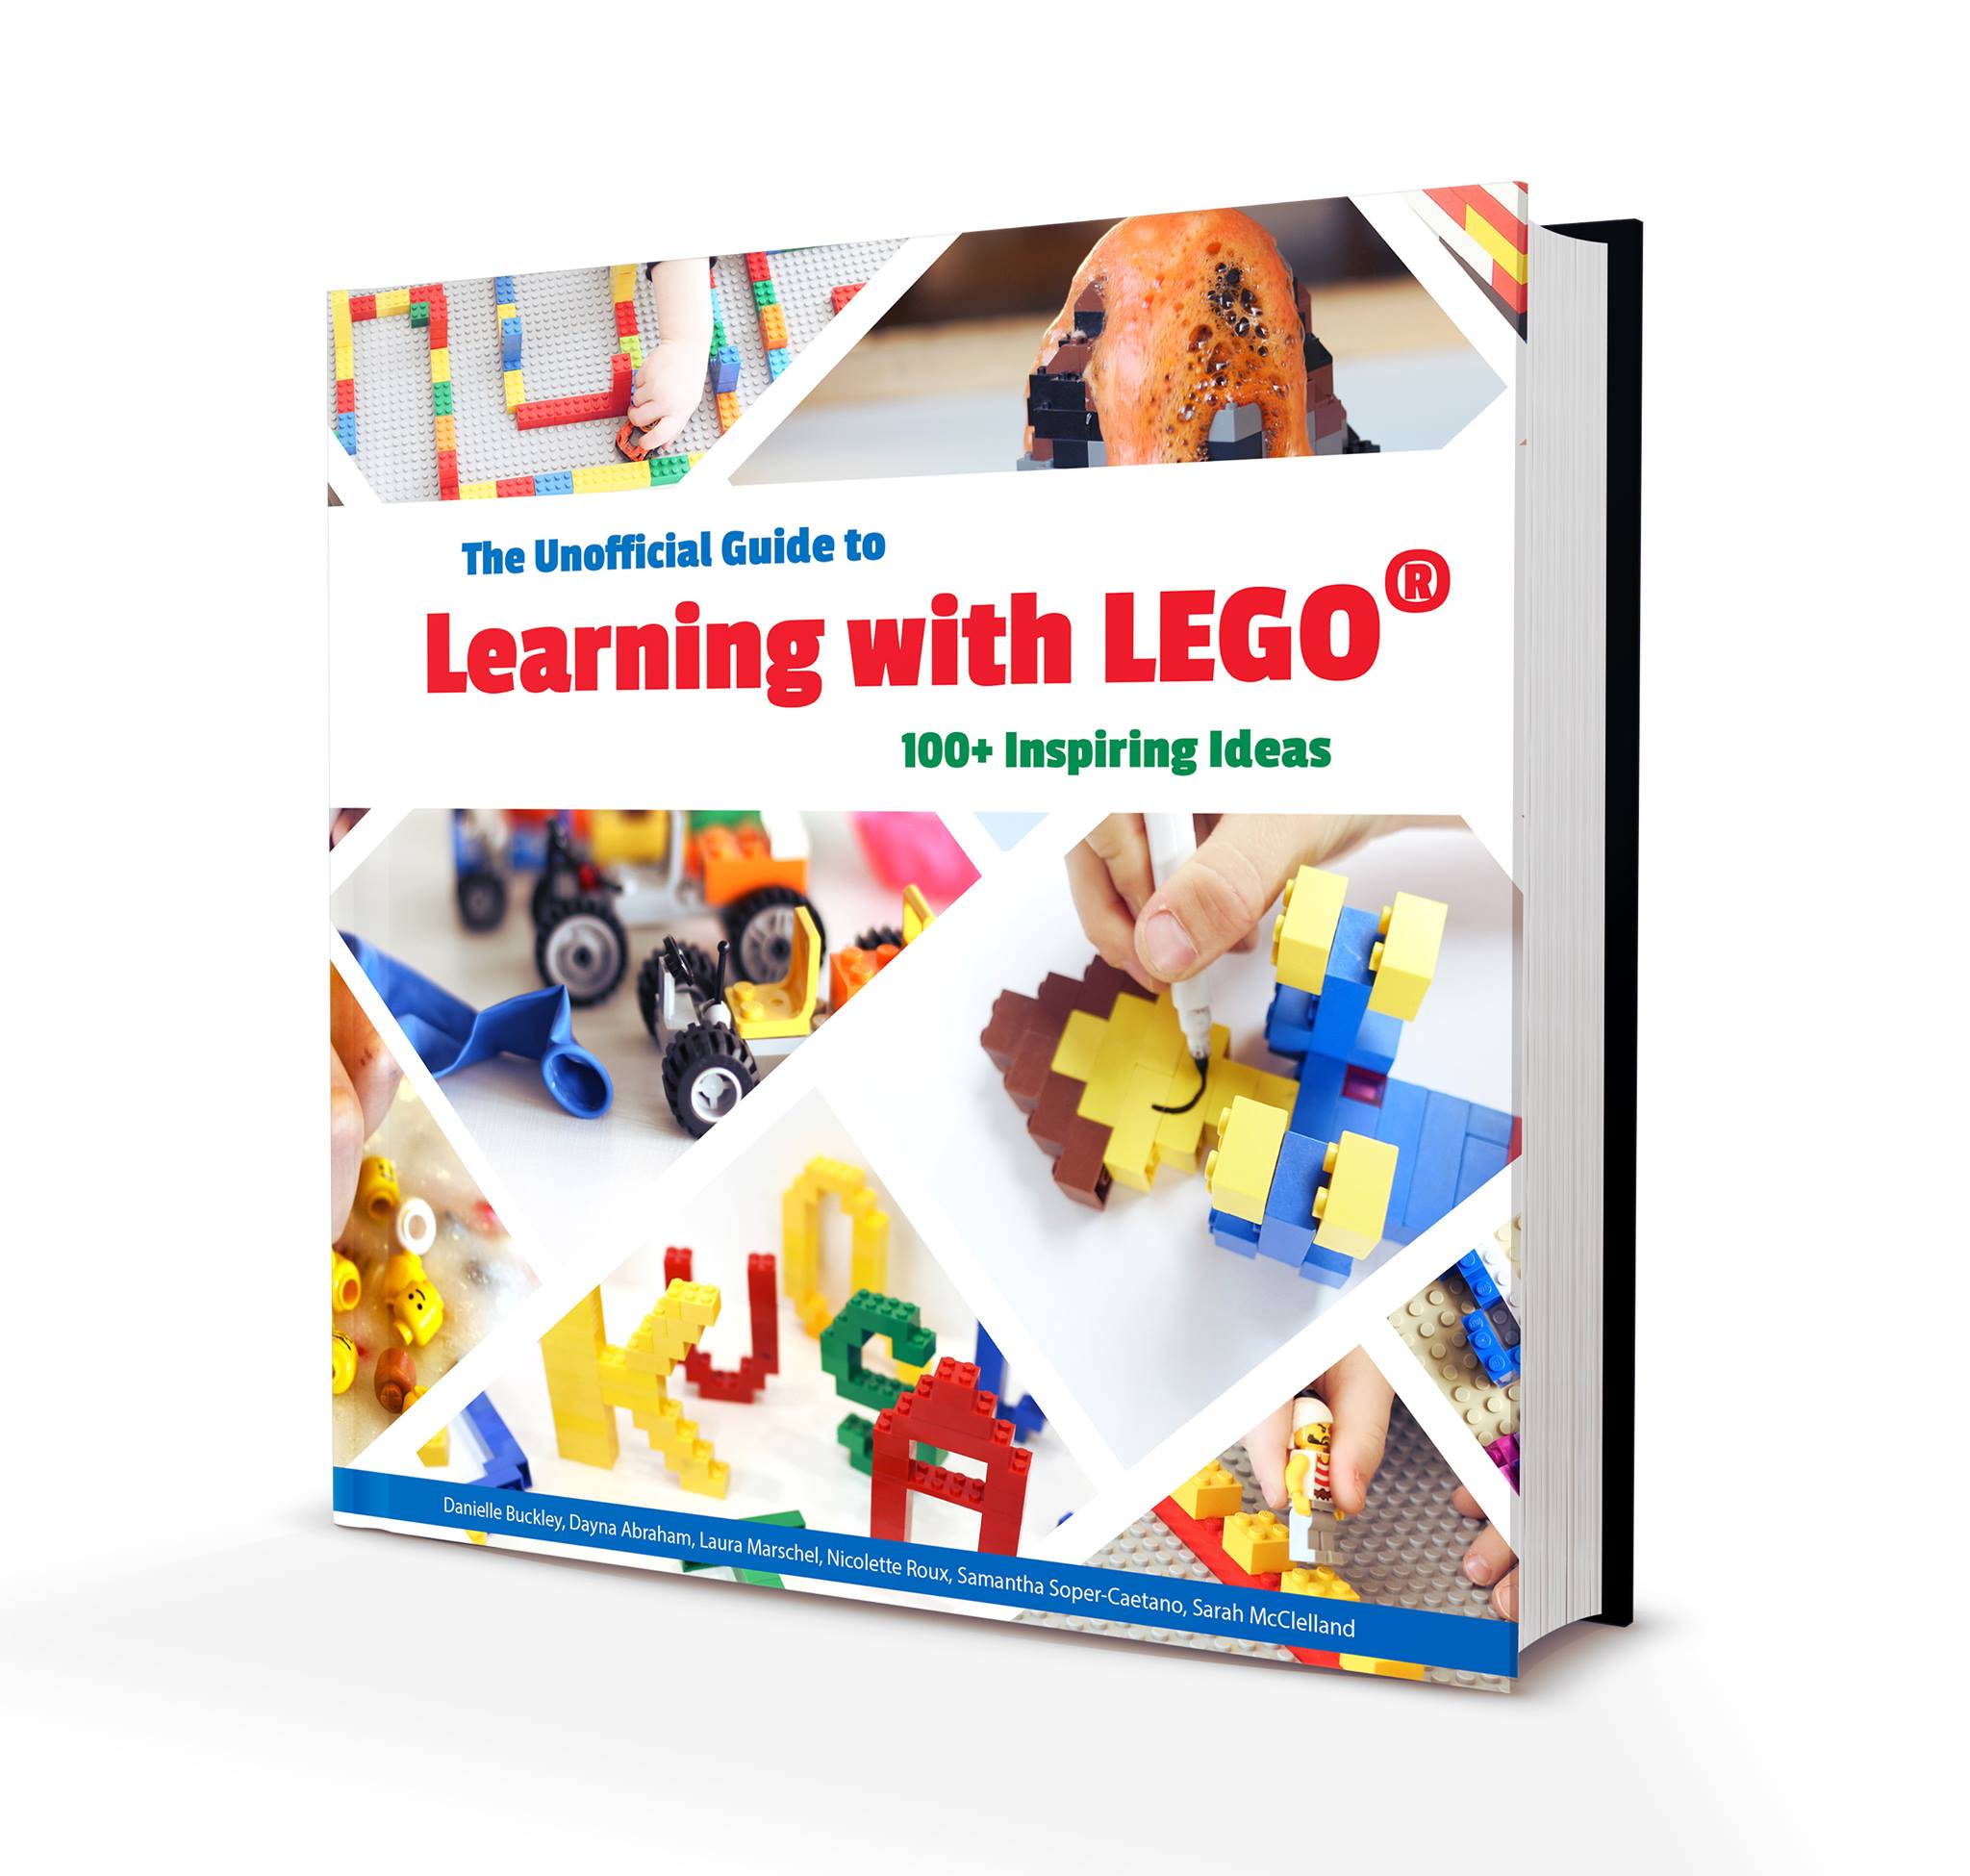 The Unofficial Guide to Learning with LEGO 